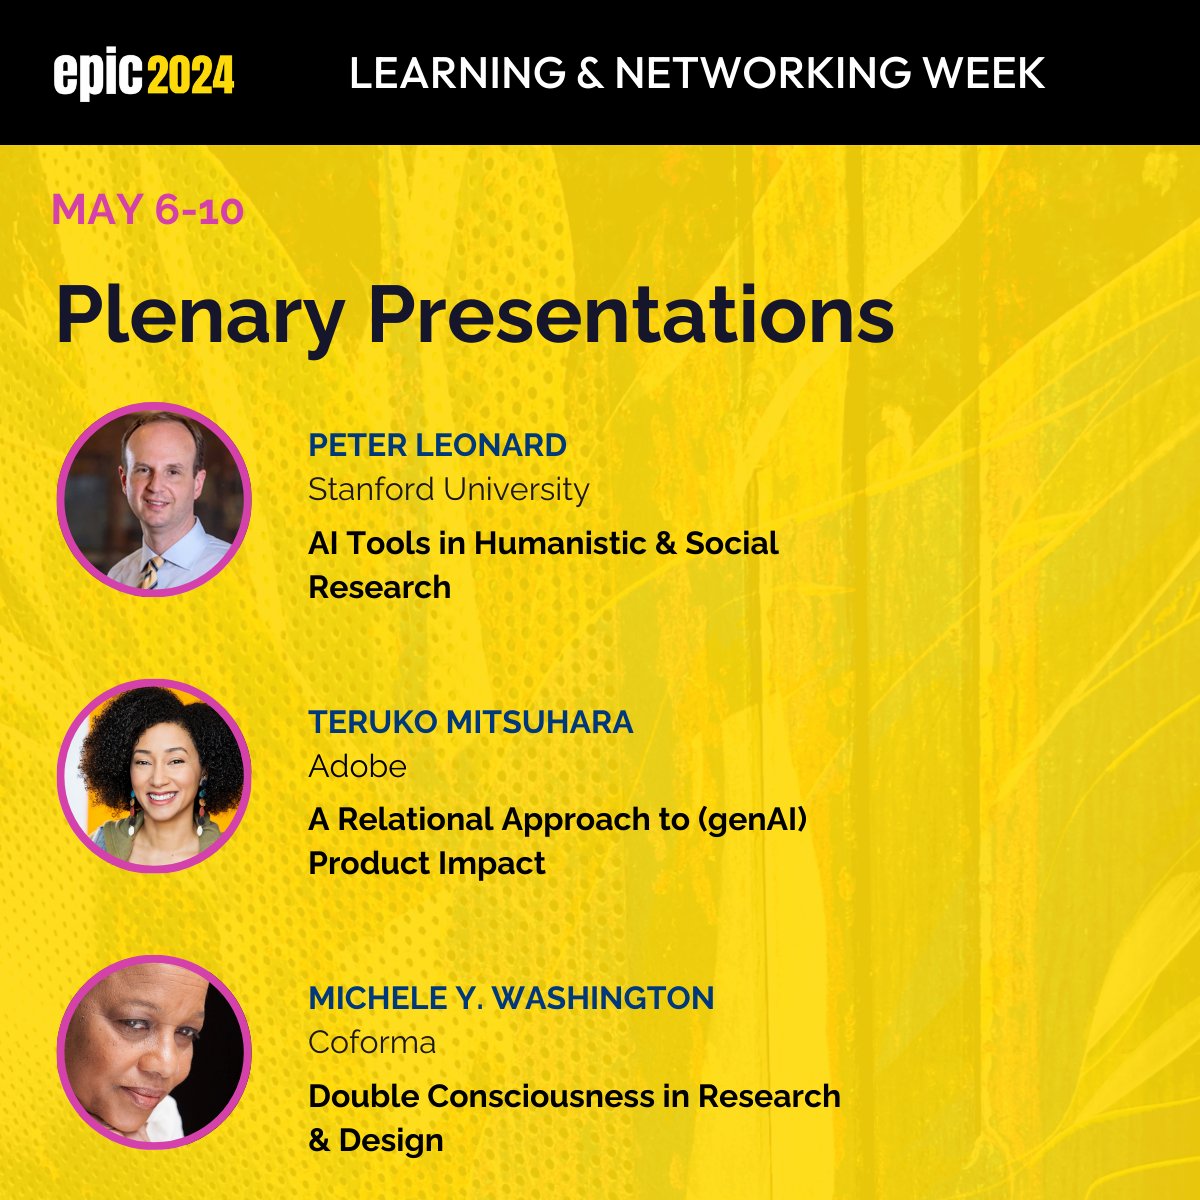 Announcing our Learning & Networking Week Plenary Presentations! Three headline speakers will engage in conversation about key issues.

Learn more about the plenary presentations & register today: 2024.epicpeople.org/learning-and-n…

#EPIC2024 #epiconference #ethnography #ai #researchdesign